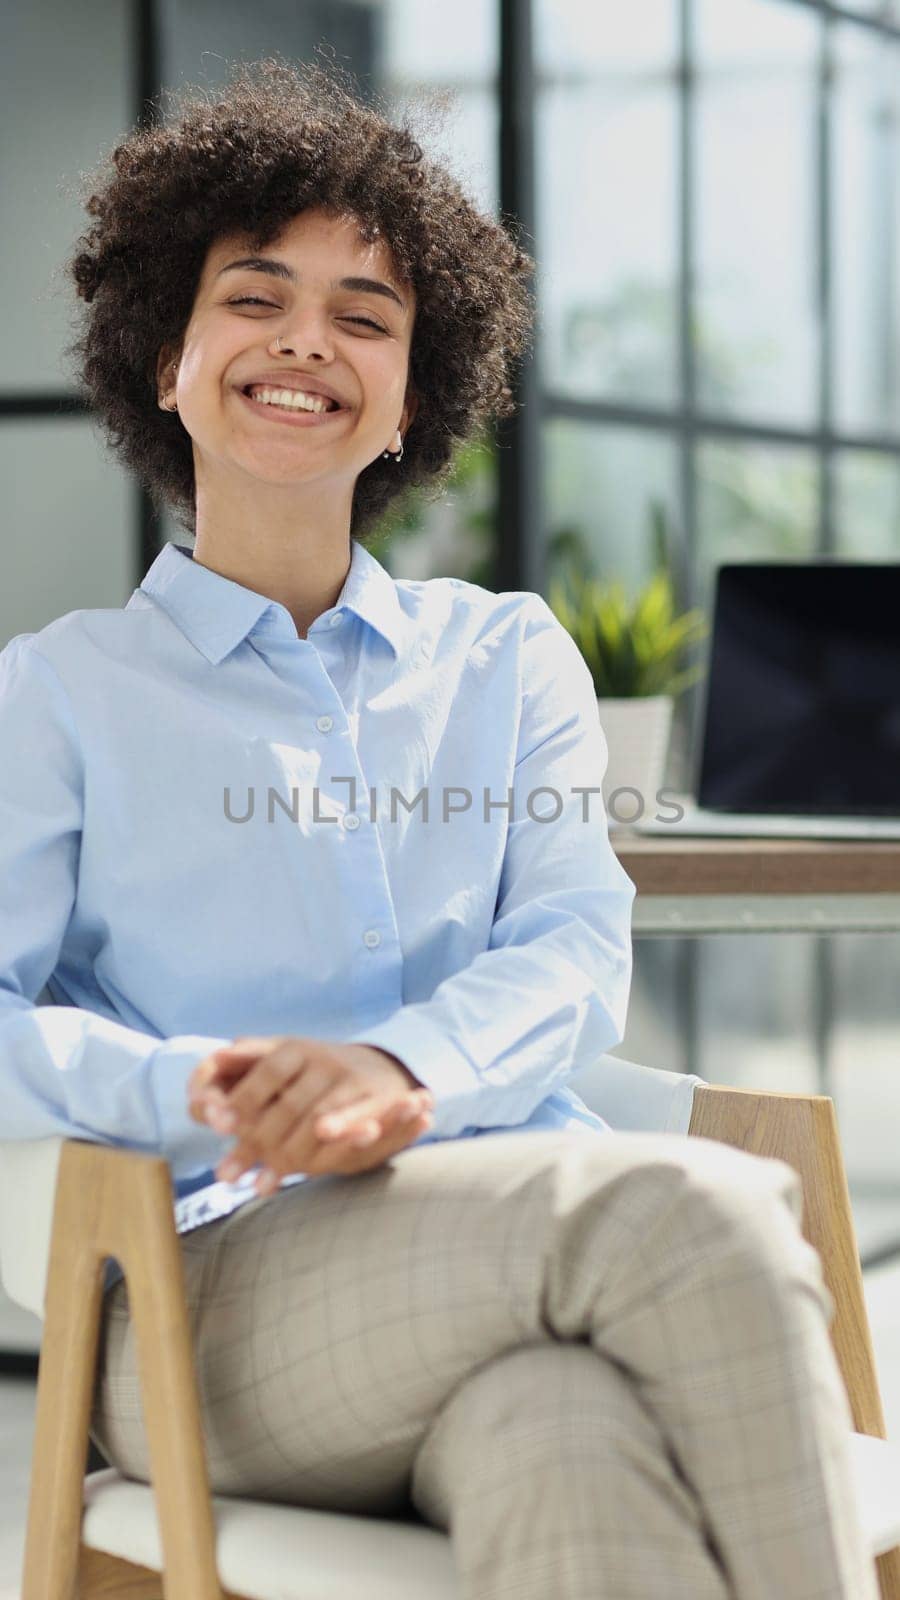 girl in the office smiles expresses success and leadership is thinking about success by Prosto